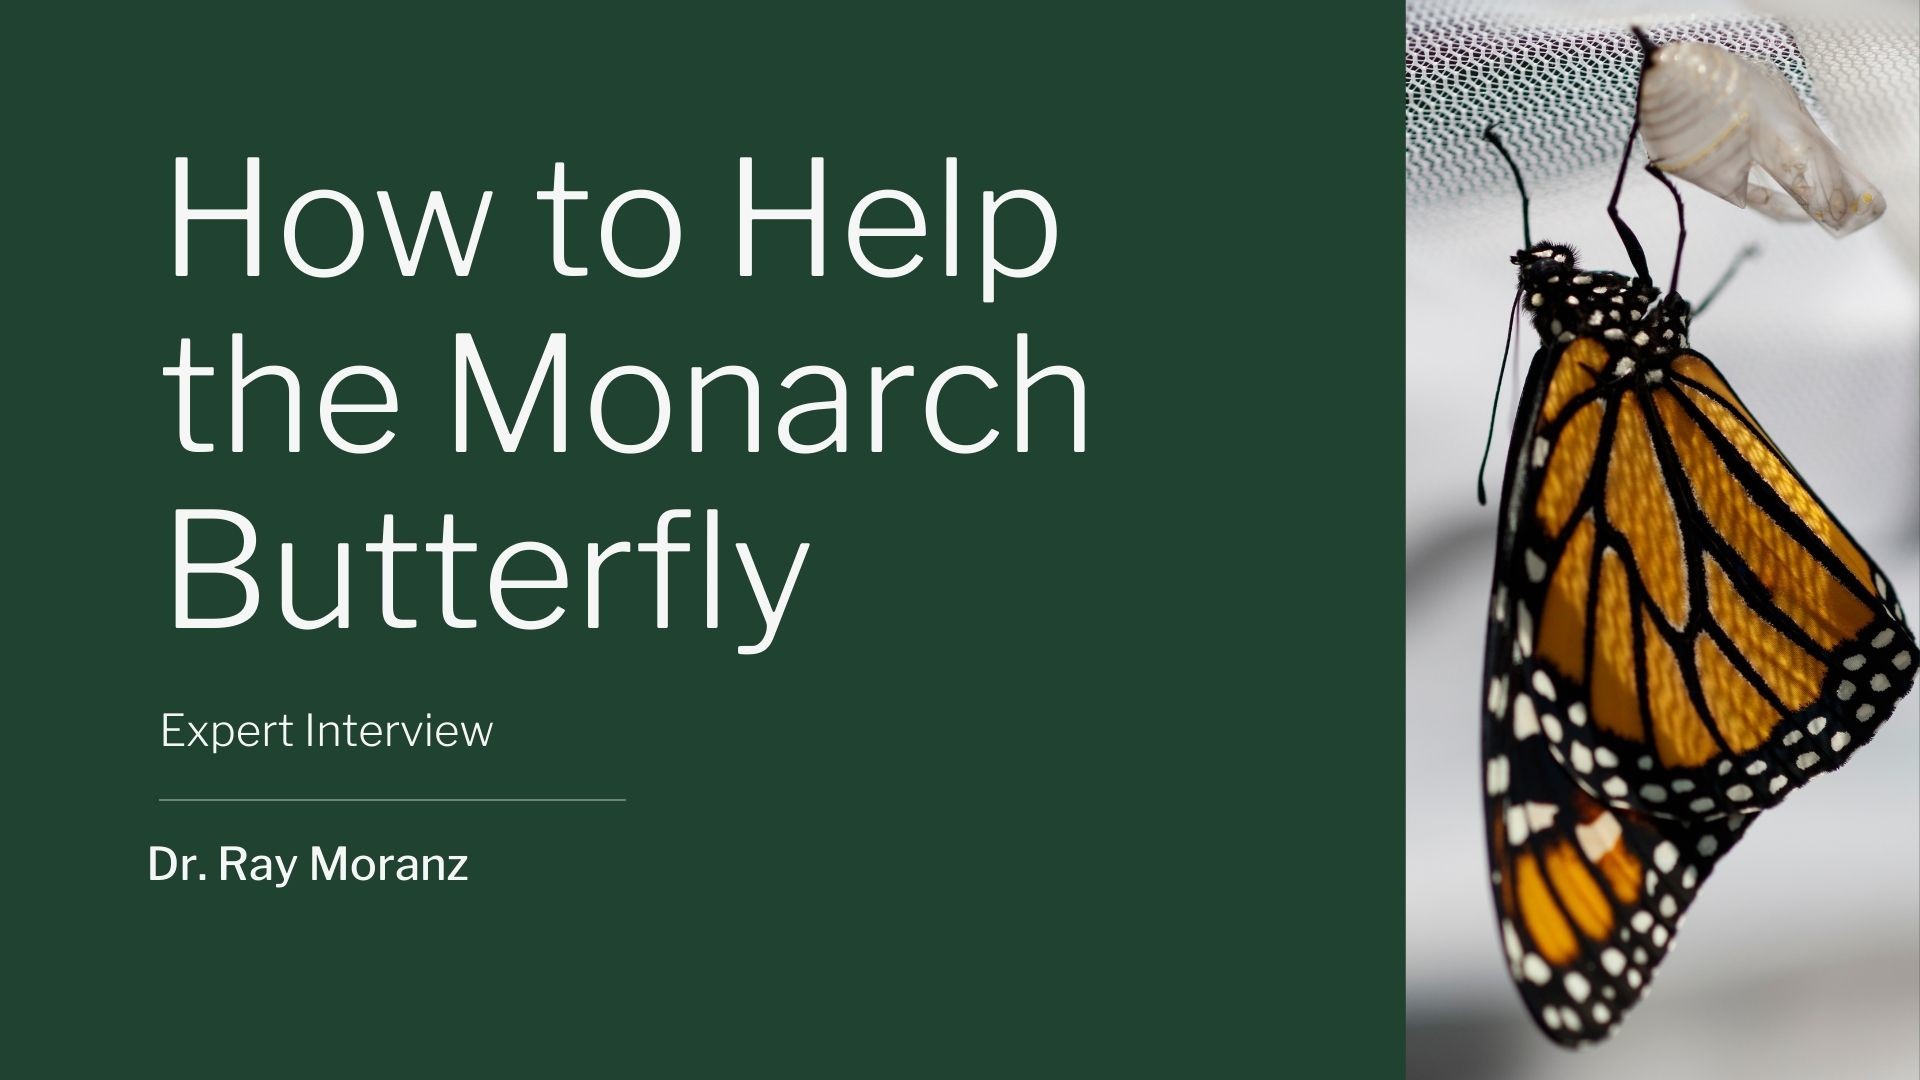 Dr. Ray Moranz, a pollinator ecologist explains the importance of  Monarch butterflies and how to help them, as the species is now on the endangered list.